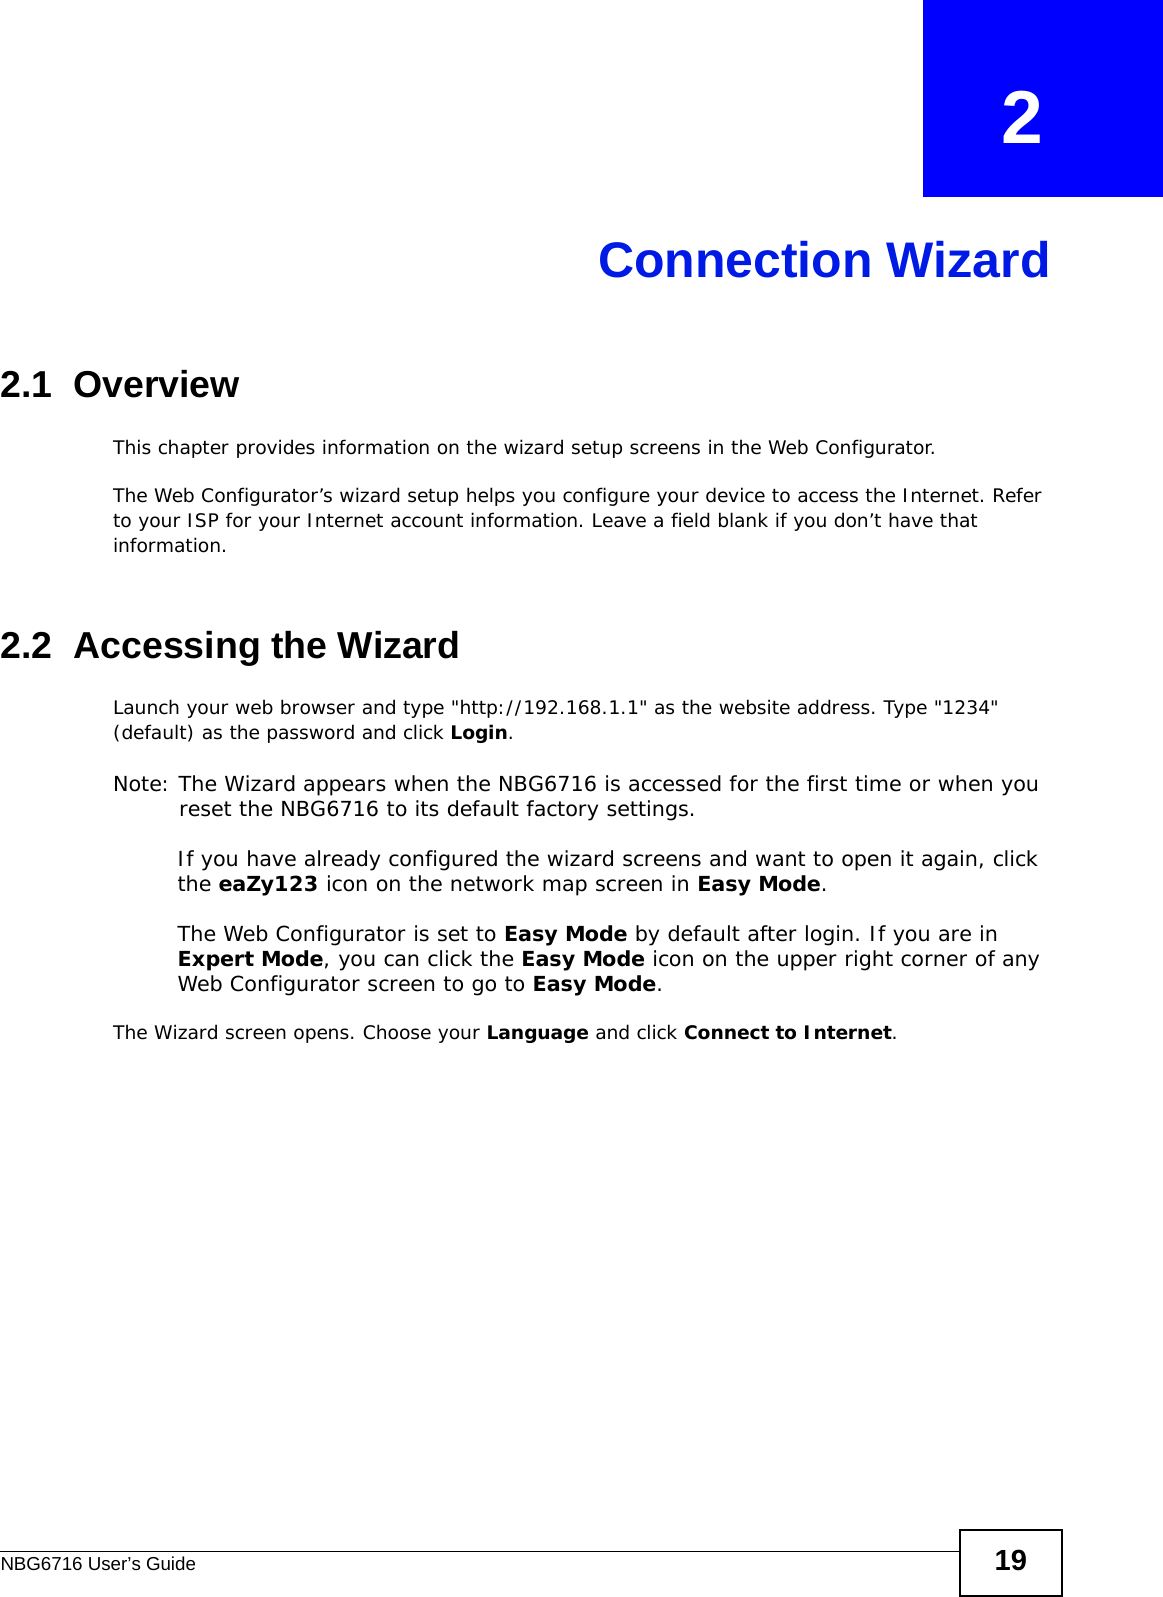 NBG6716 User’s Guide 19CHAPTER   2Connection Wizard2.1  OverviewThis chapter provides information on the wizard setup screens in the Web Configurator.The Web Configurator’s wizard setup helps you configure your device to access the Internet. Refer to your ISP for your Internet account information. Leave a field blank if you don’t have that information.2.2  Accessing the WizardLaunch your web browser and type &quot;http://192.168.1.1&quot; as the website address. Type &quot;1234&quot; (default) as the password and click Login.Note: The Wizard appears when the NBG6716 is accessed for the first time or when you reset the NBG6716 to its default factory settings.If you have already configured the wizard screens and want to open it again, click the eaZy123 icon on the network map screen in Easy Mode.The Web Configurator is set to Easy Mode by default after login. If you are in Expert Mode, you can click the Easy Mode icon on the upper right corner of any Web Configurator screen to go to Easy Mode.The Wizard screen opens. Choose your Language and click Connect to Internet.